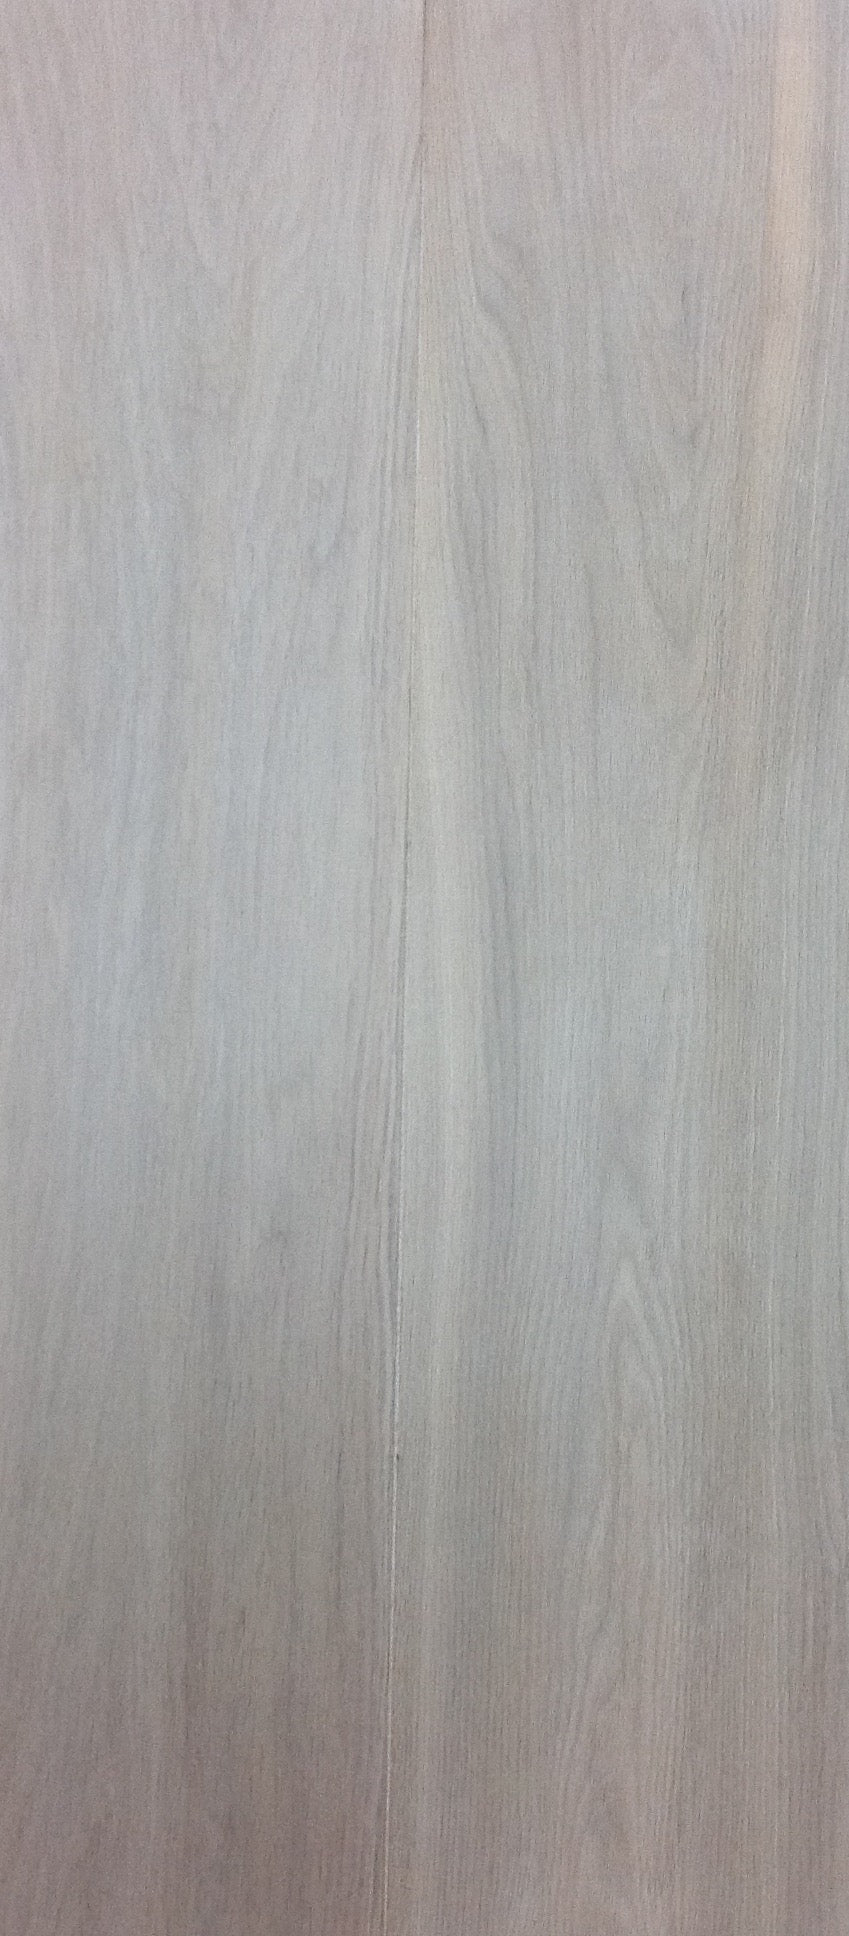 White engineered wood flooring “St James Collection”